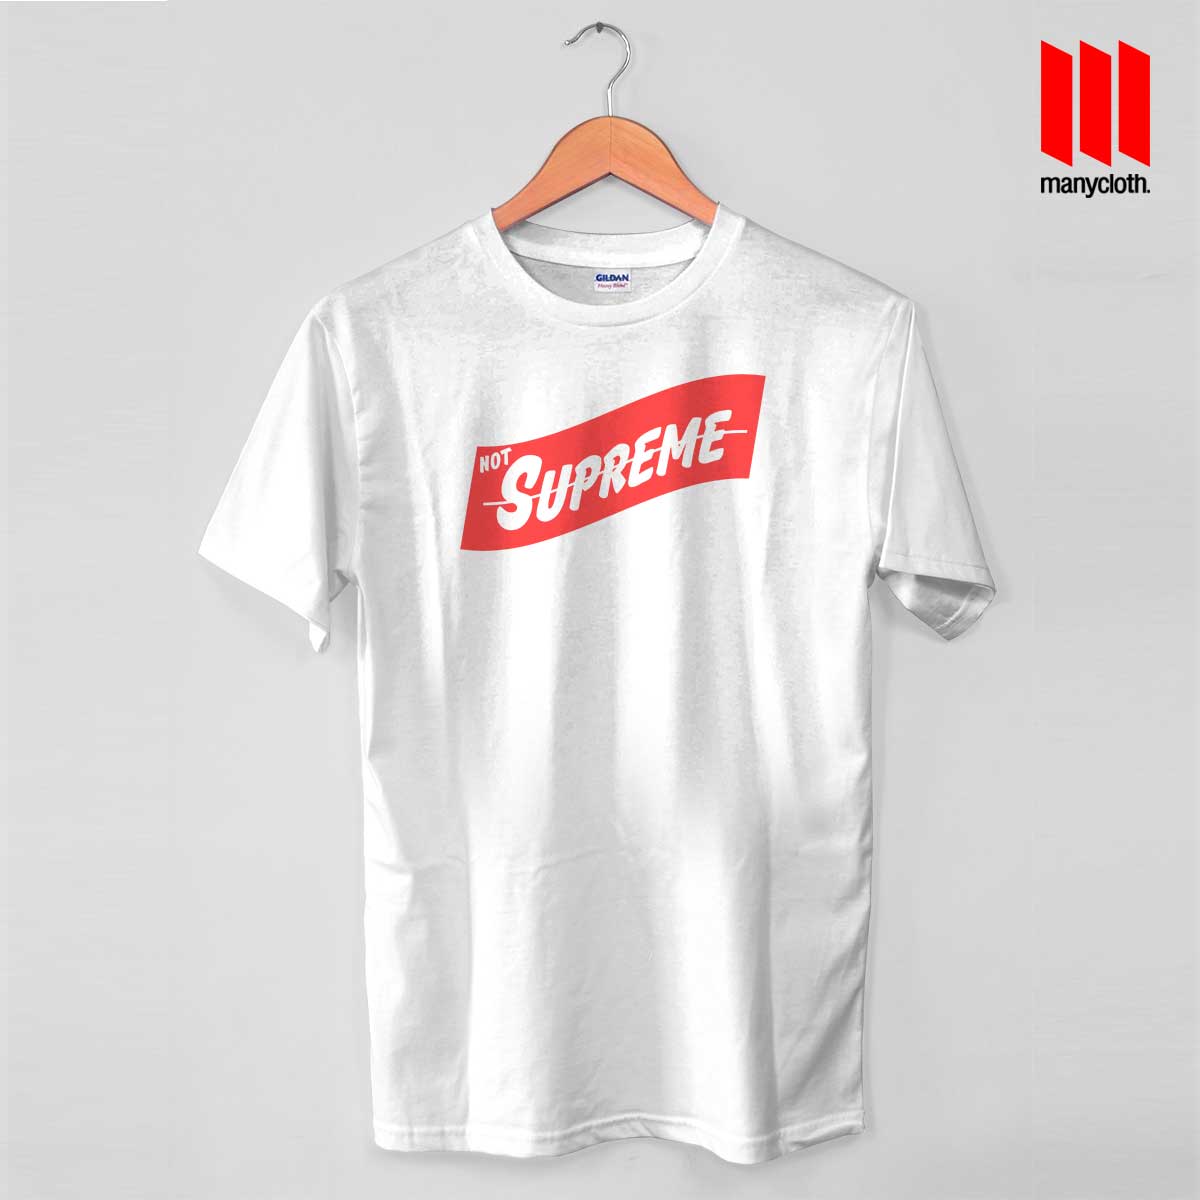 This Is Not Supreme T Shirt - The Best and Cheap Parody T Shirts